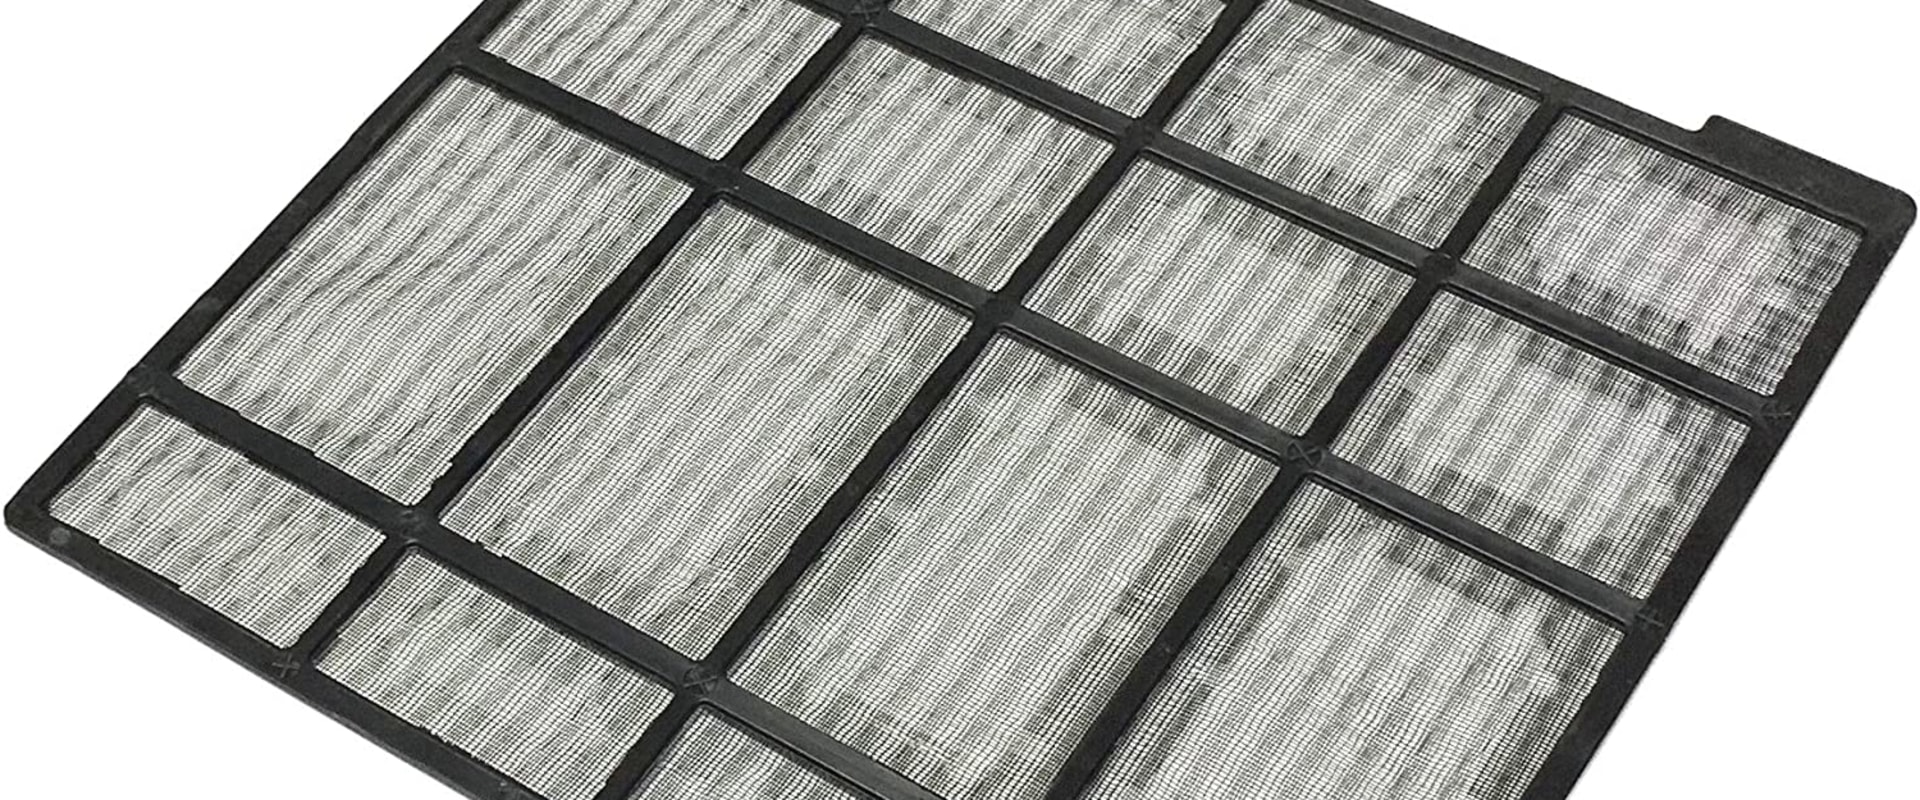 How Much Does an Air Conditioner Filter Cost?